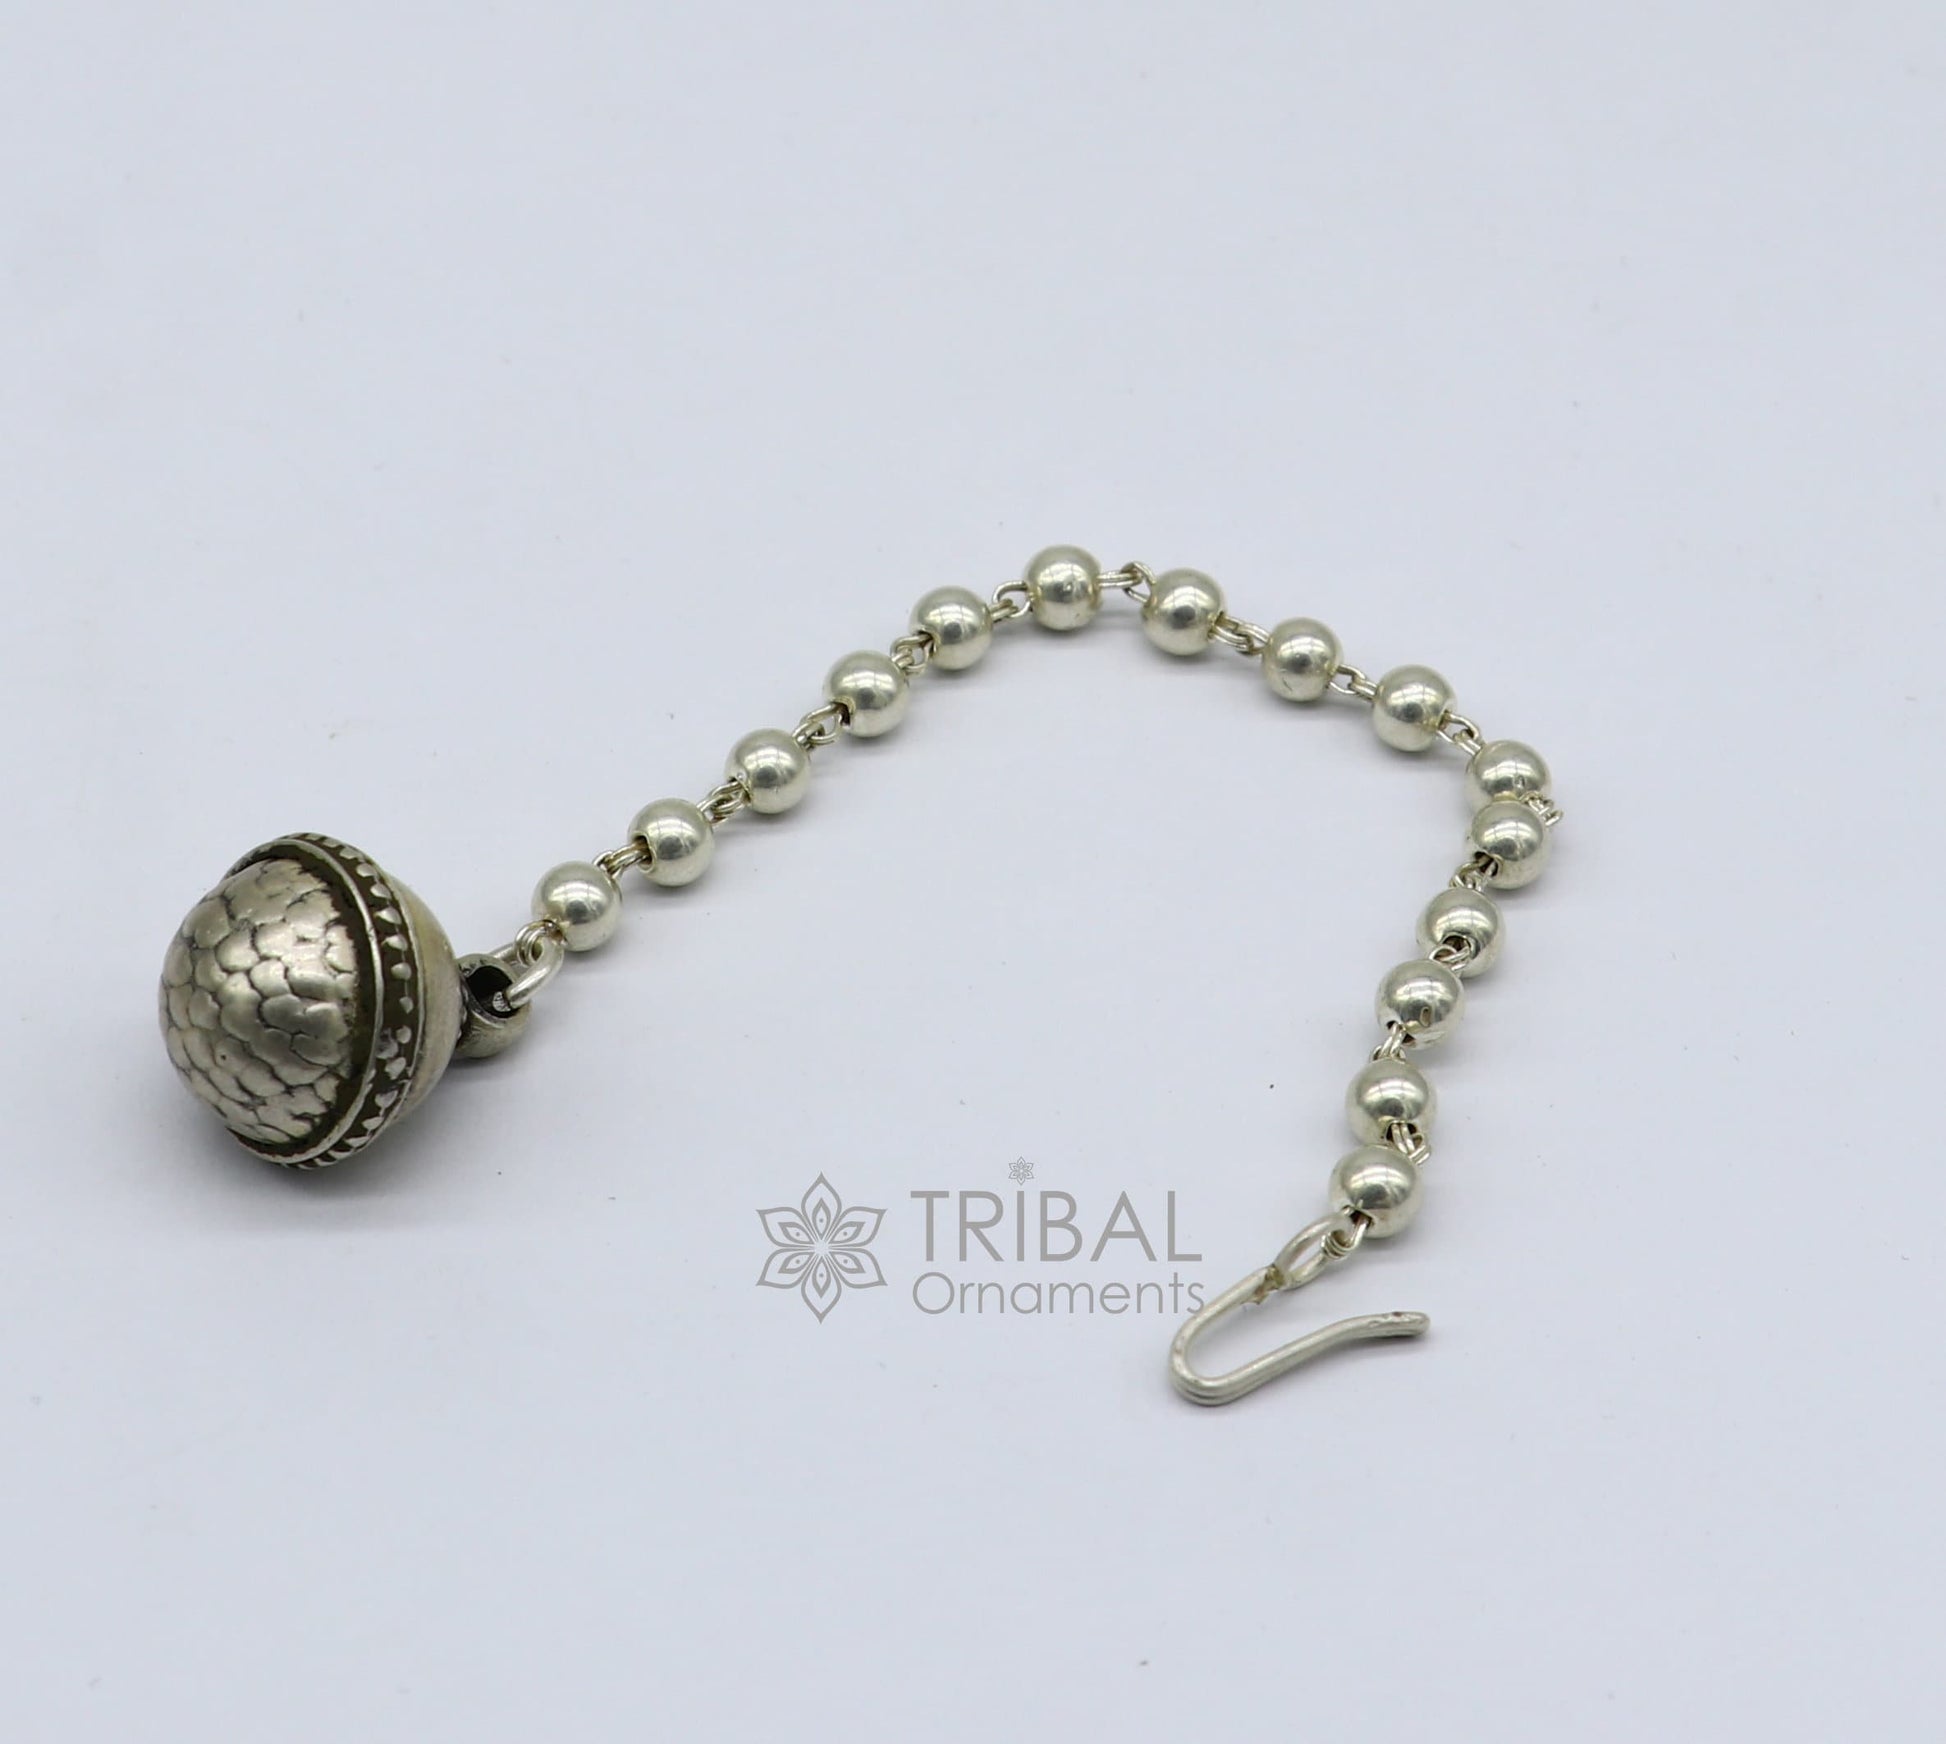 Indian traditional cultural vintage style mangtika amazing hair jewellery head jewelry 925 sterling silver tika ethnic tribal jewelry mt22 - TRIBAL ORNAMENTS